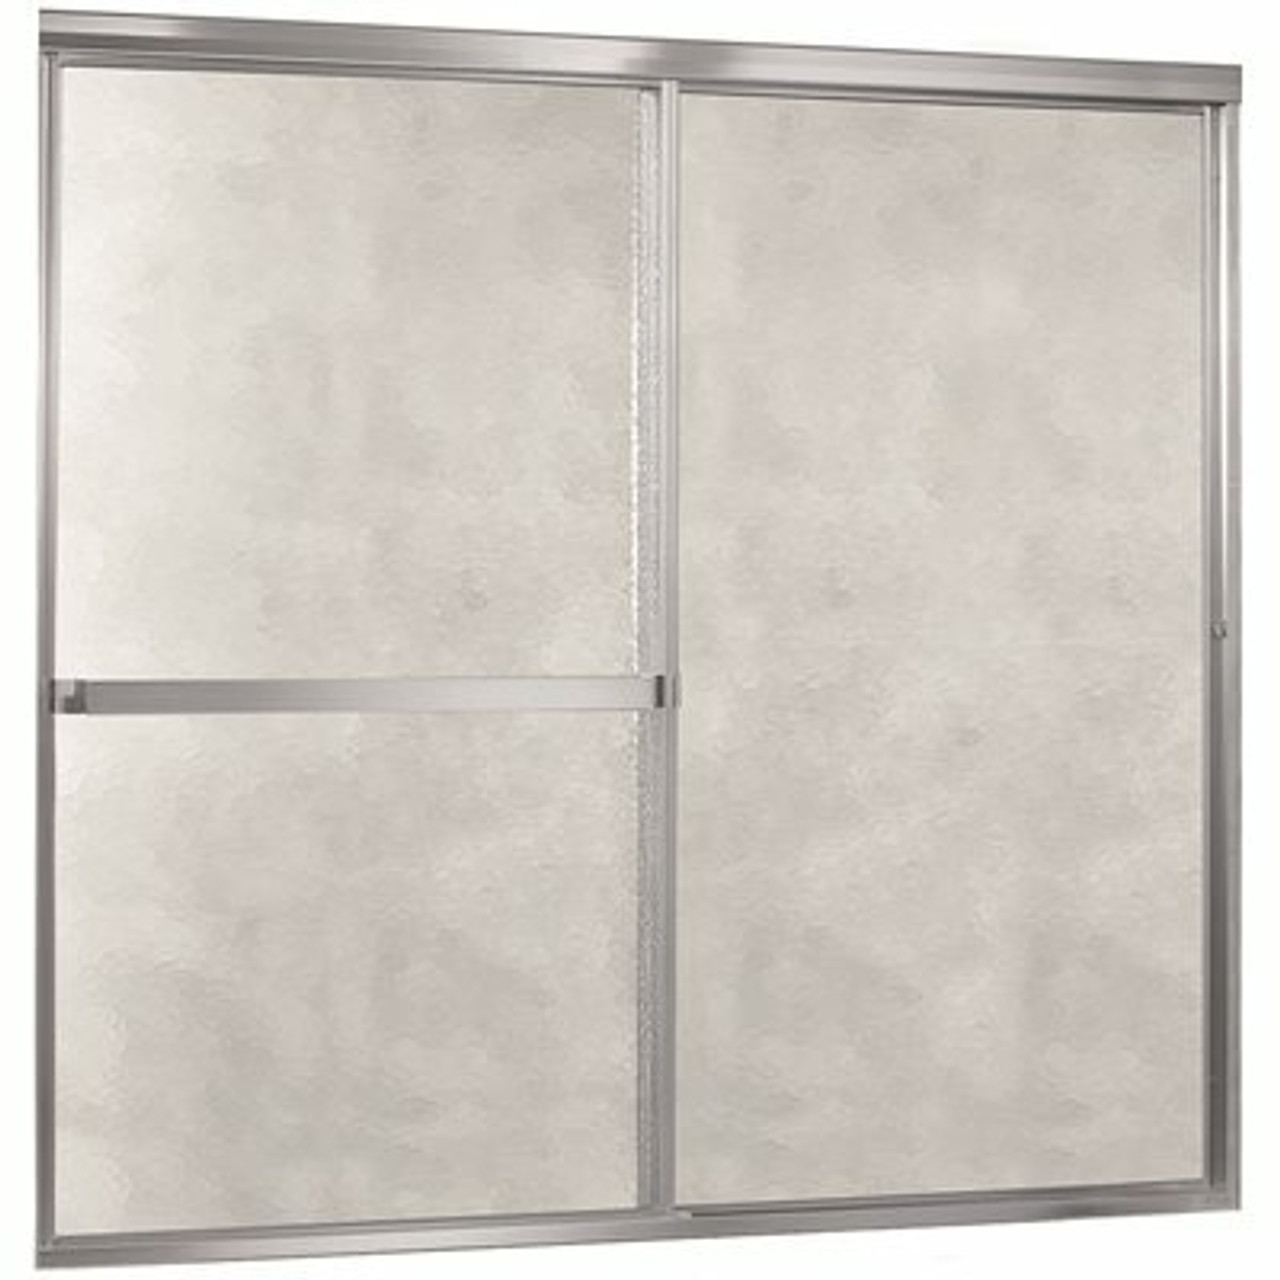 Foremost Lakeside 56 In. - 60 In. W X 58 In. H Framed Bypass Shower Door In Silver And Obscure Glass Without Handle